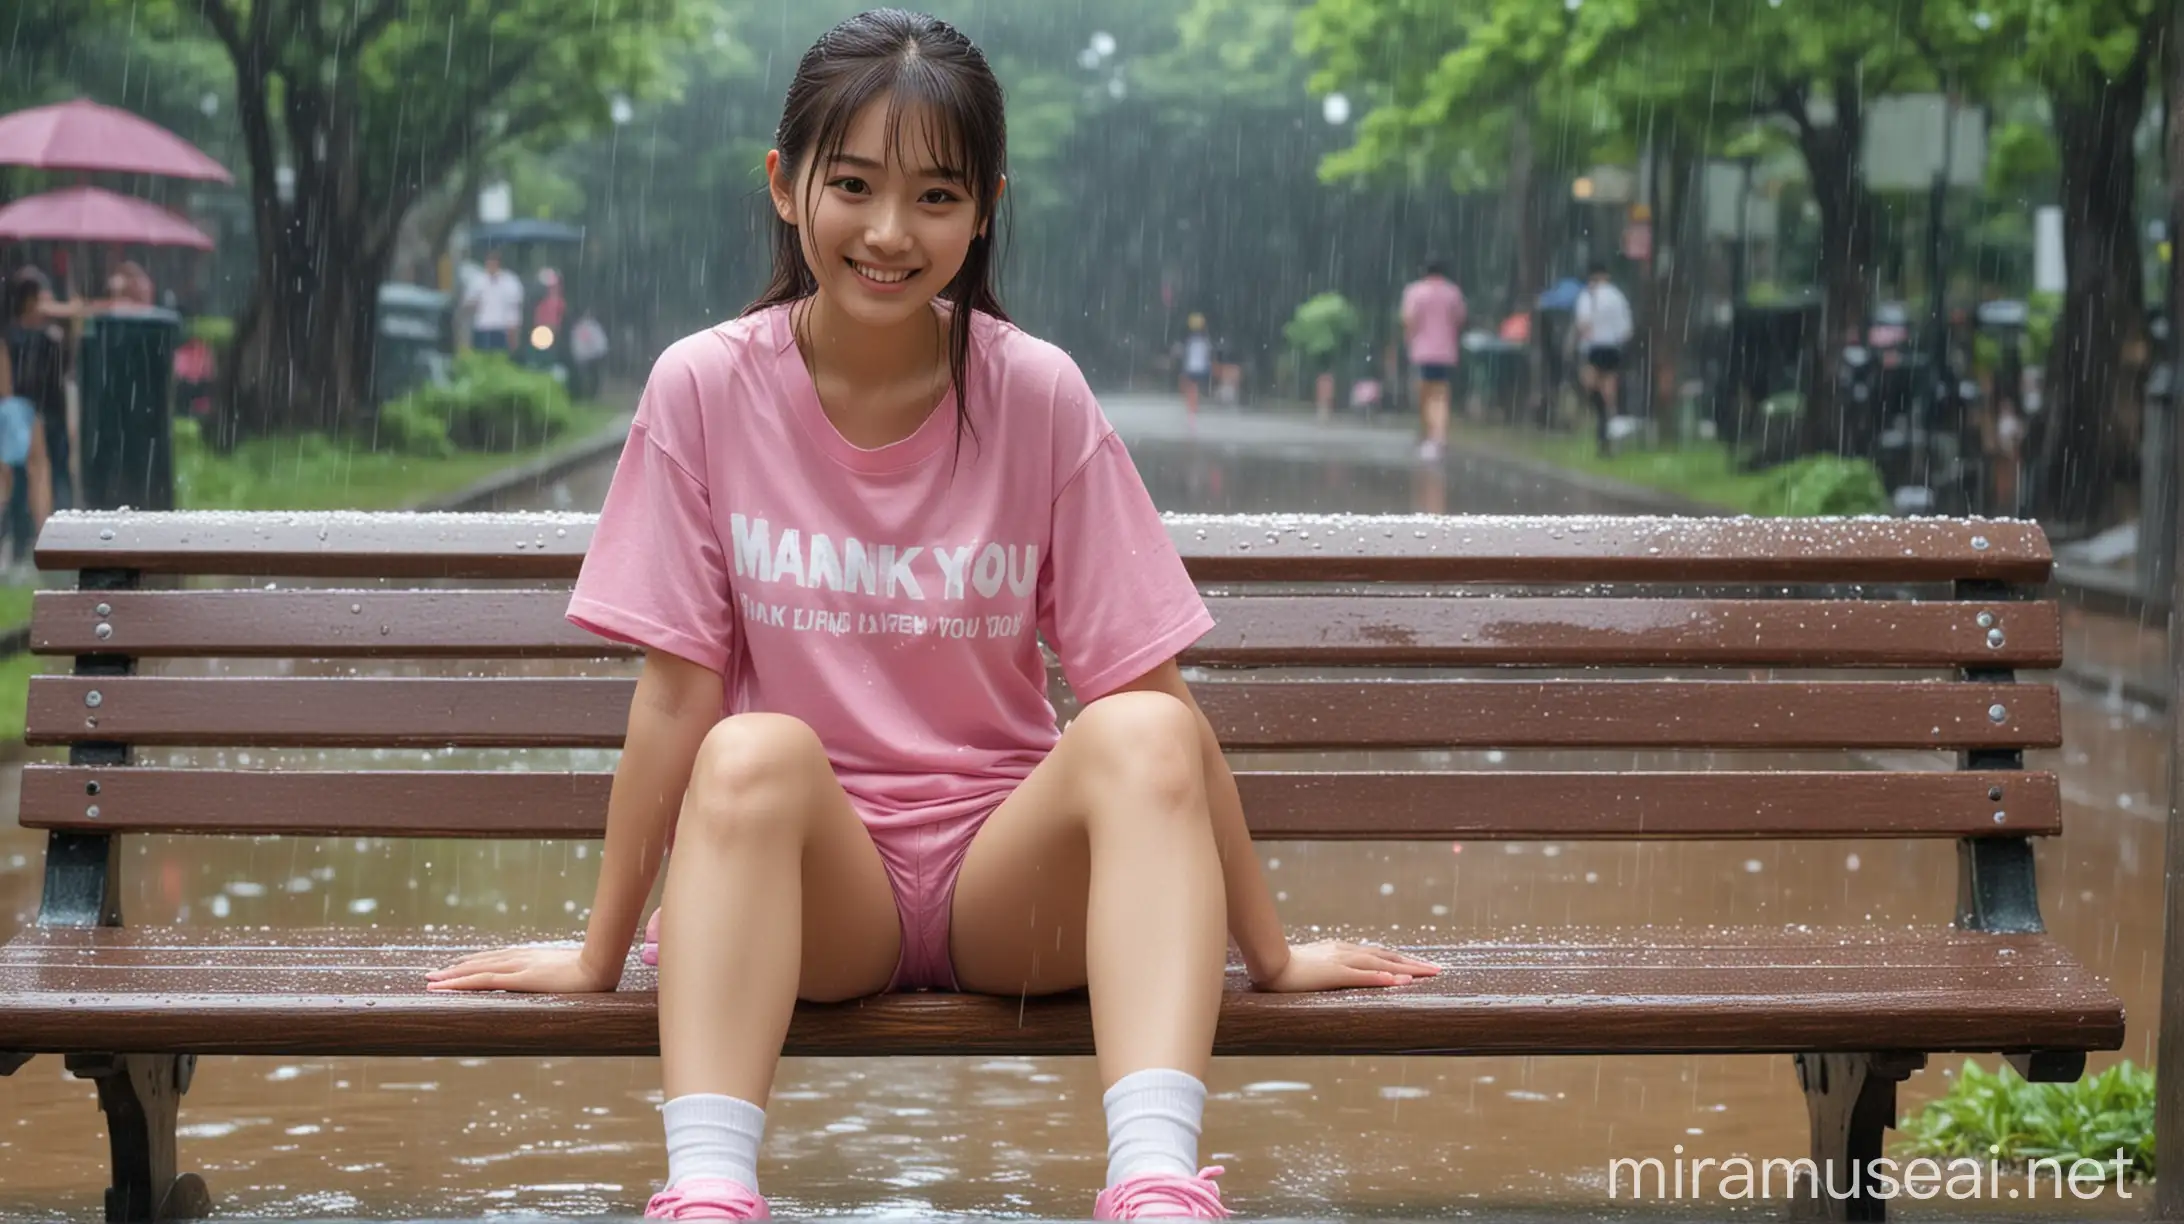 Smiling Japanese Girl in Rainy Park Bench Scene with Pink Outfit